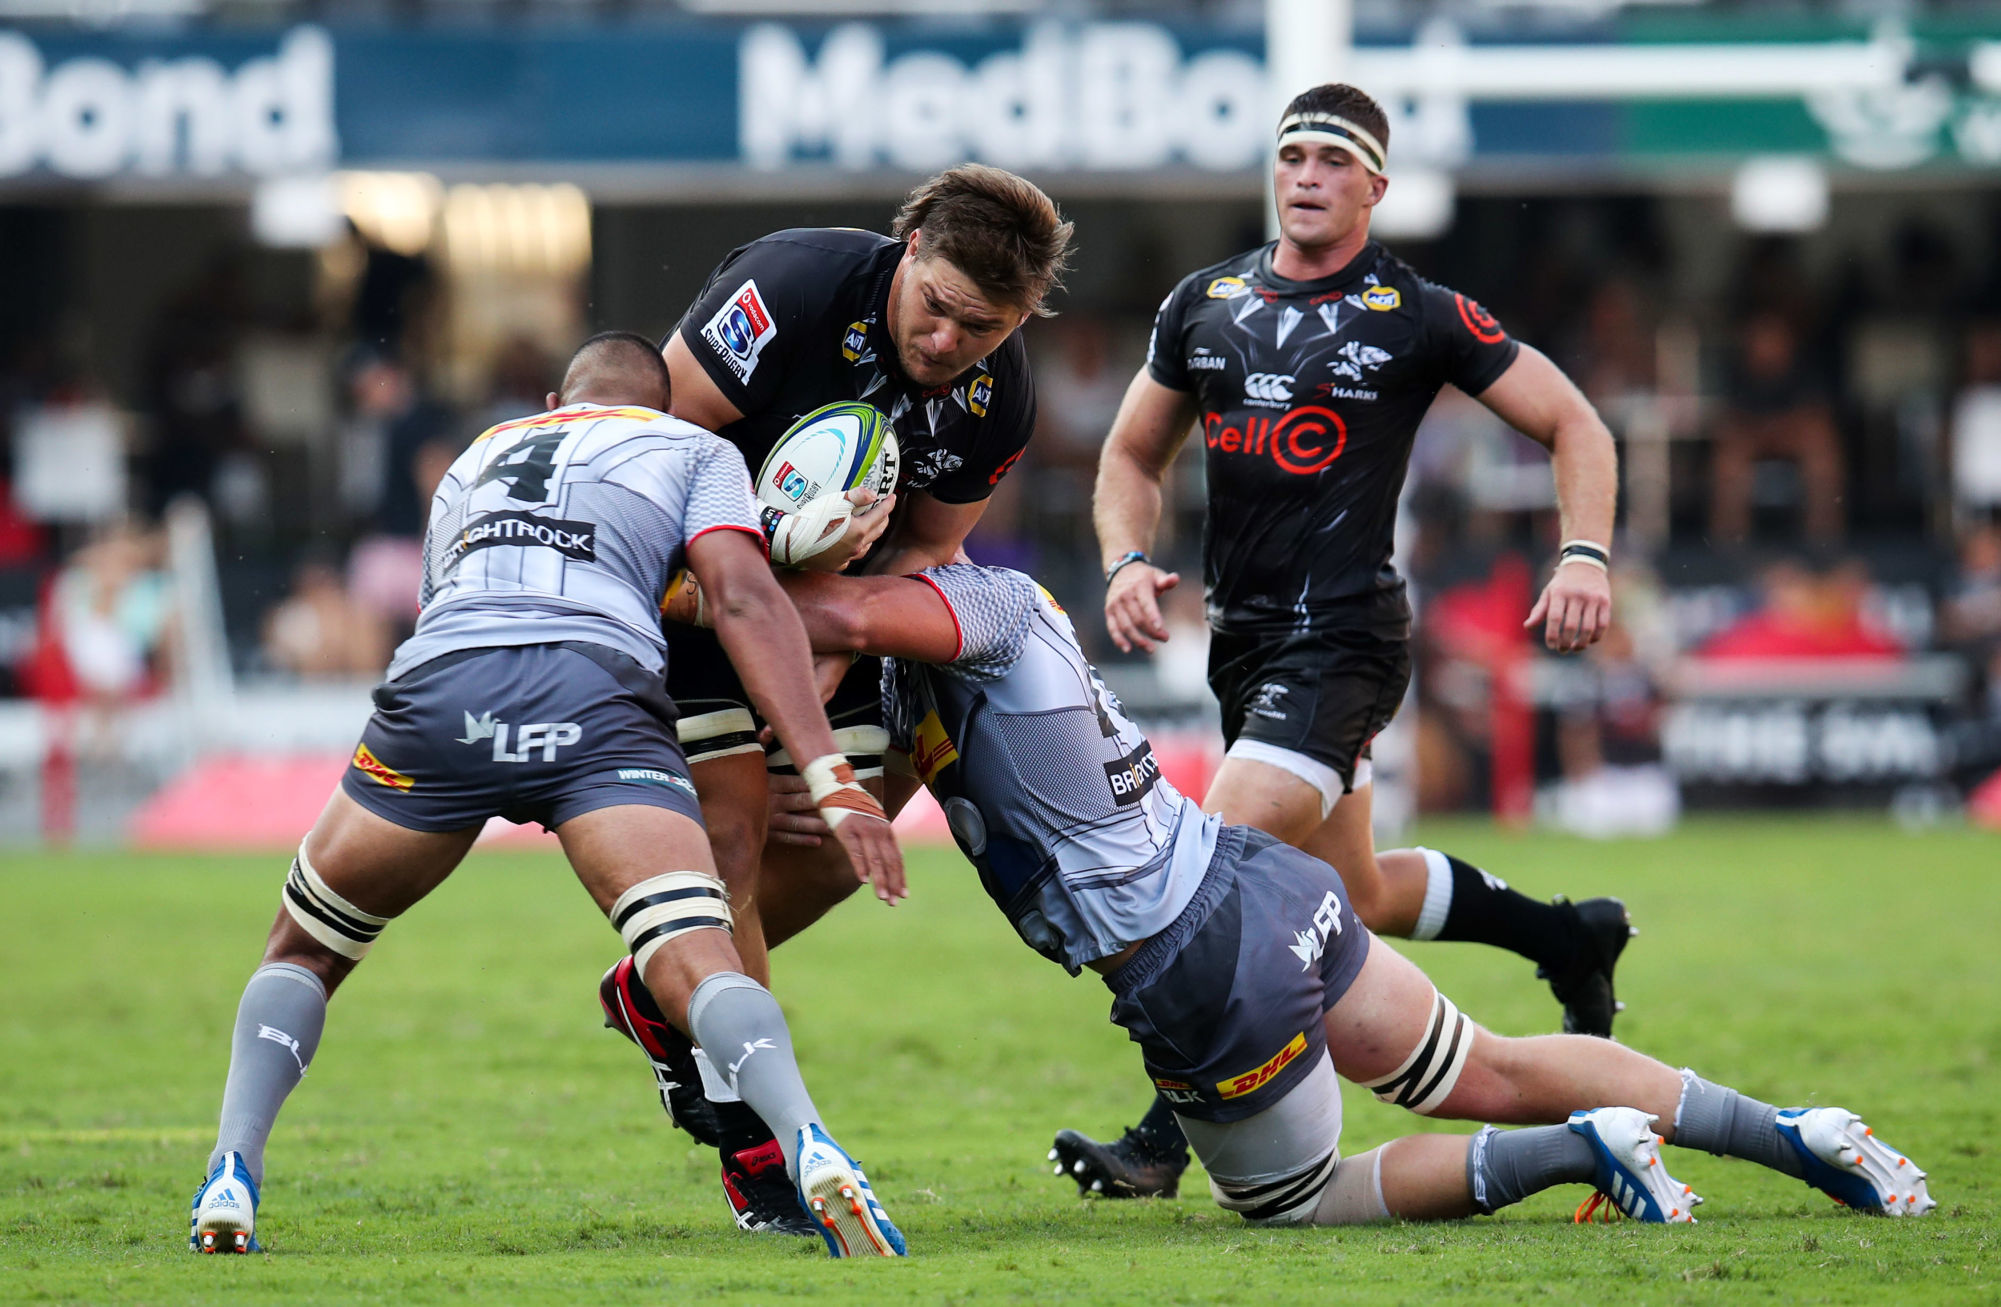 Le Roux Roets of the Sharks tackled by Cobus Wiese () and Salmaan Moerat of the Stormers during the 2020 Super Rugby match between Sharks and Stormers at the Jonsson Kings Park, Durban on the 14 March 2020 ©Muzi Ntombela/BackpagePix 


Photo by Icon Sport - Salmaan MOERAT - Cobus WIESE - Le Roux ROETS - Kings Park Stadium - Durban (Afrique du Sud)